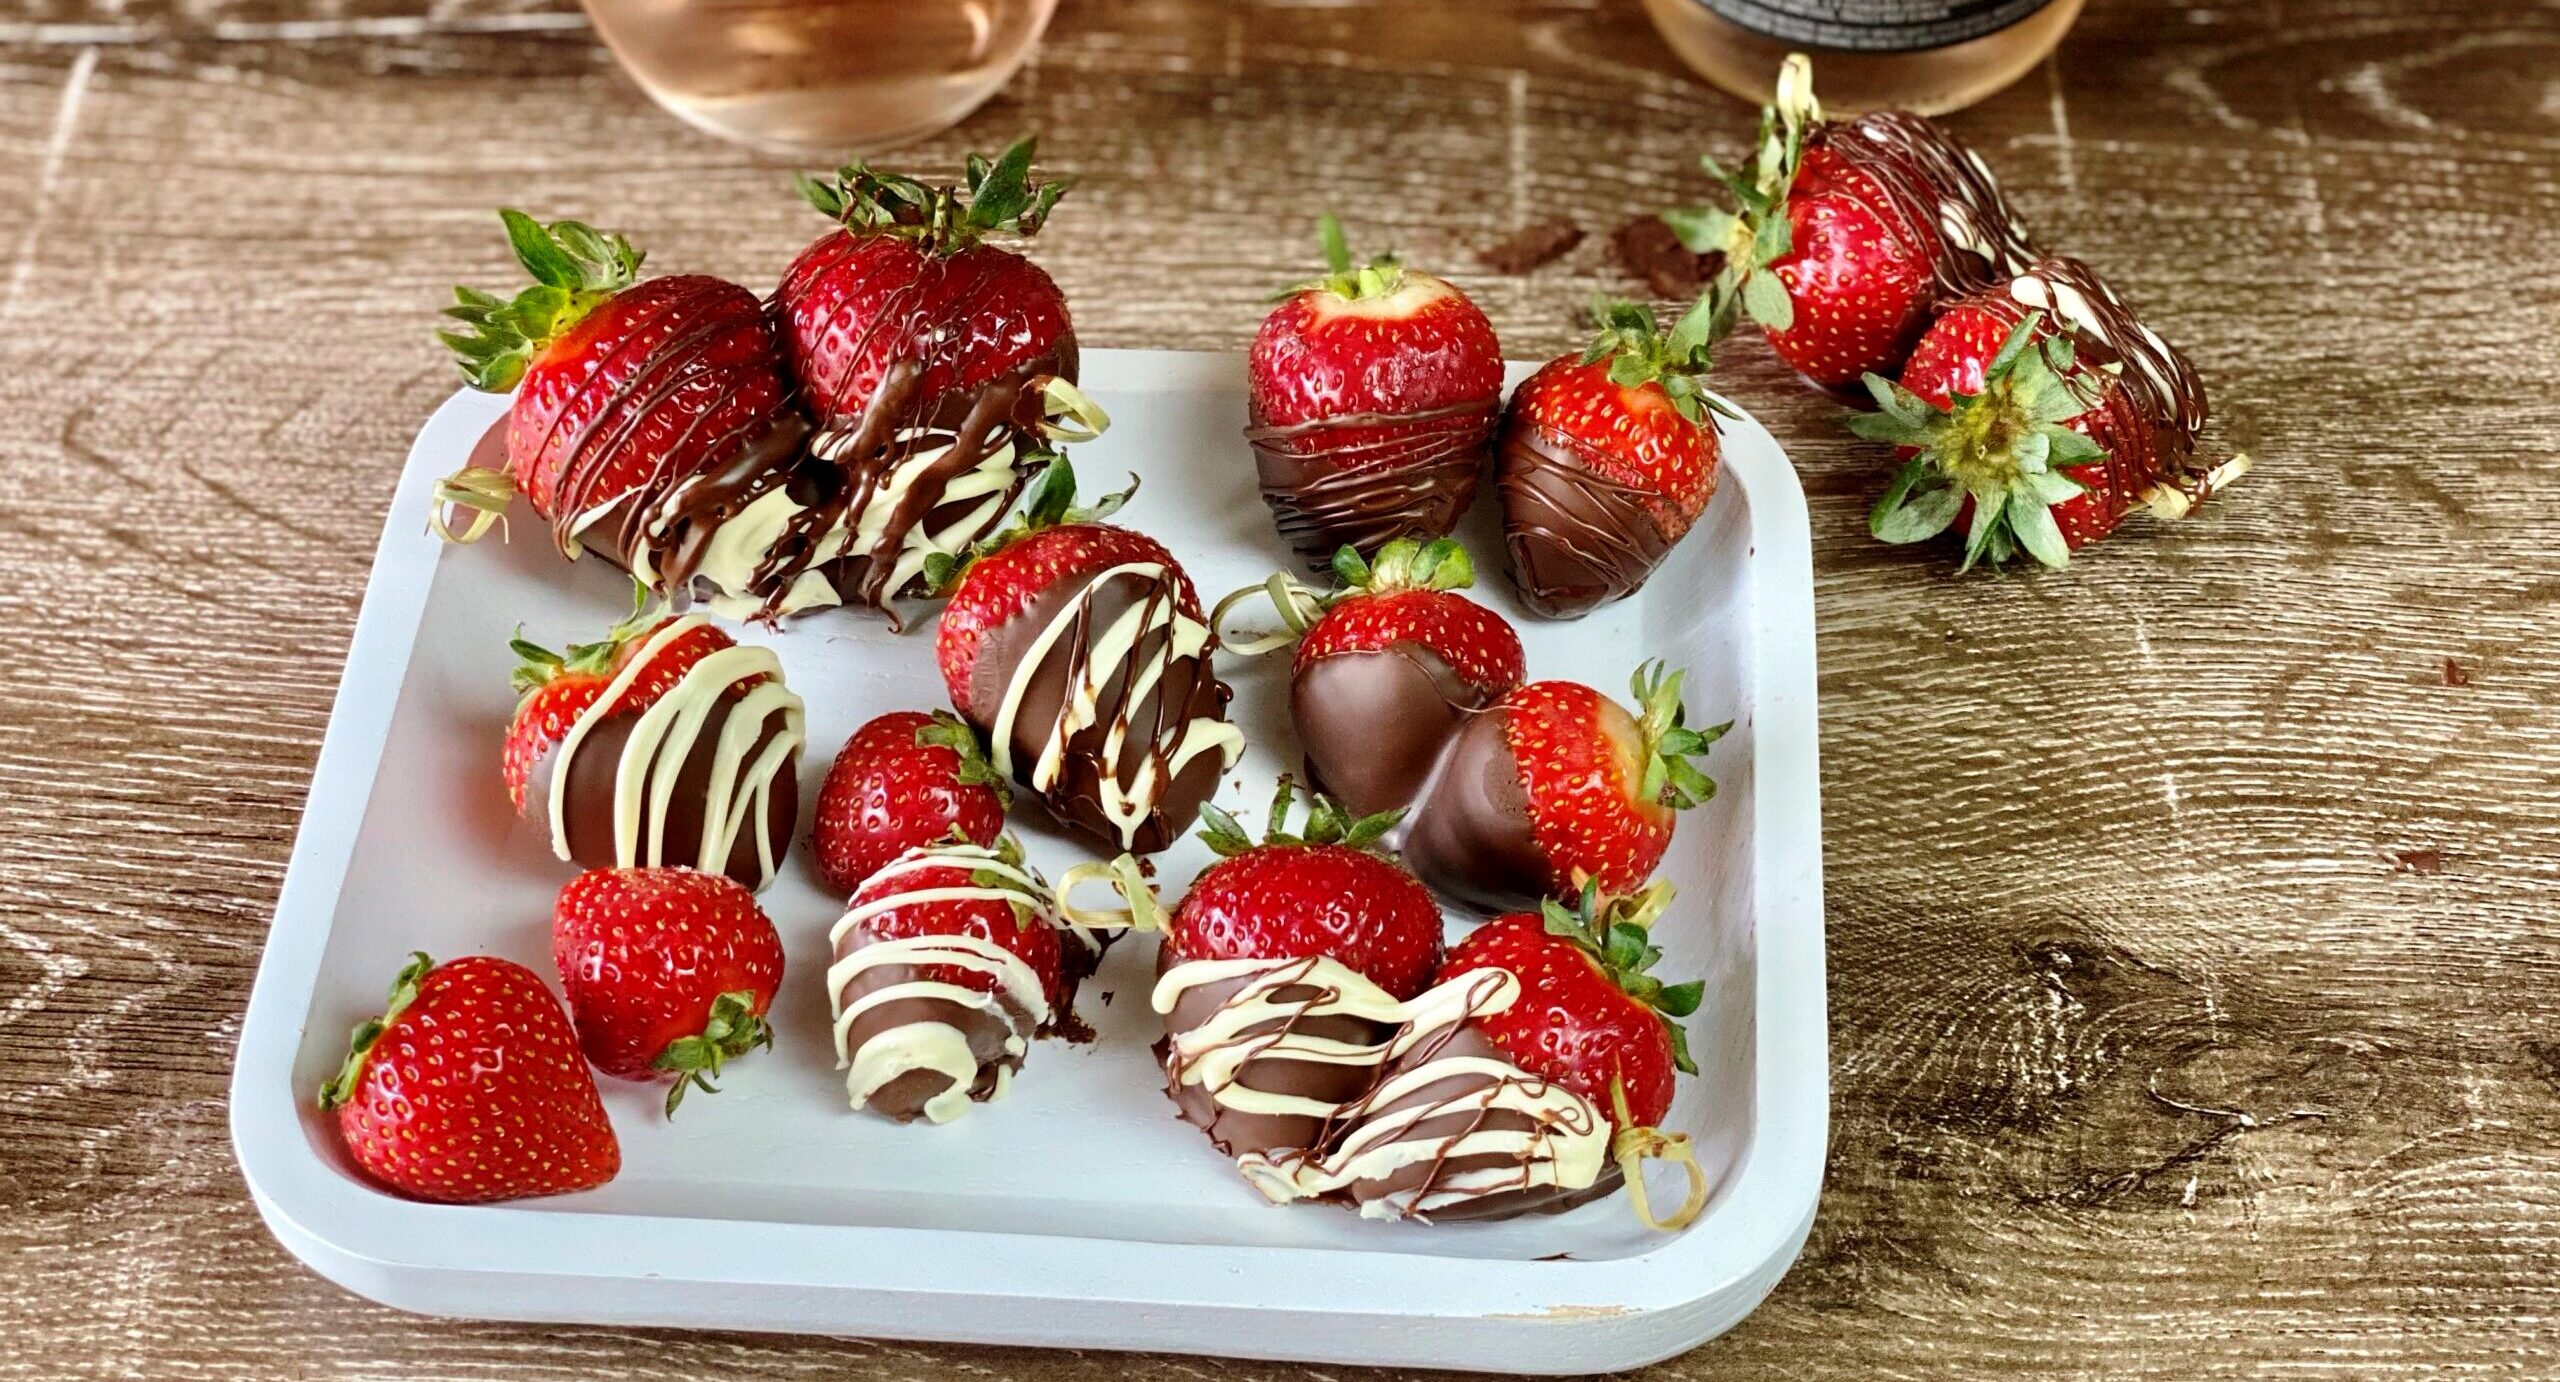 25 Sweet Treats To Make For Your Valentine